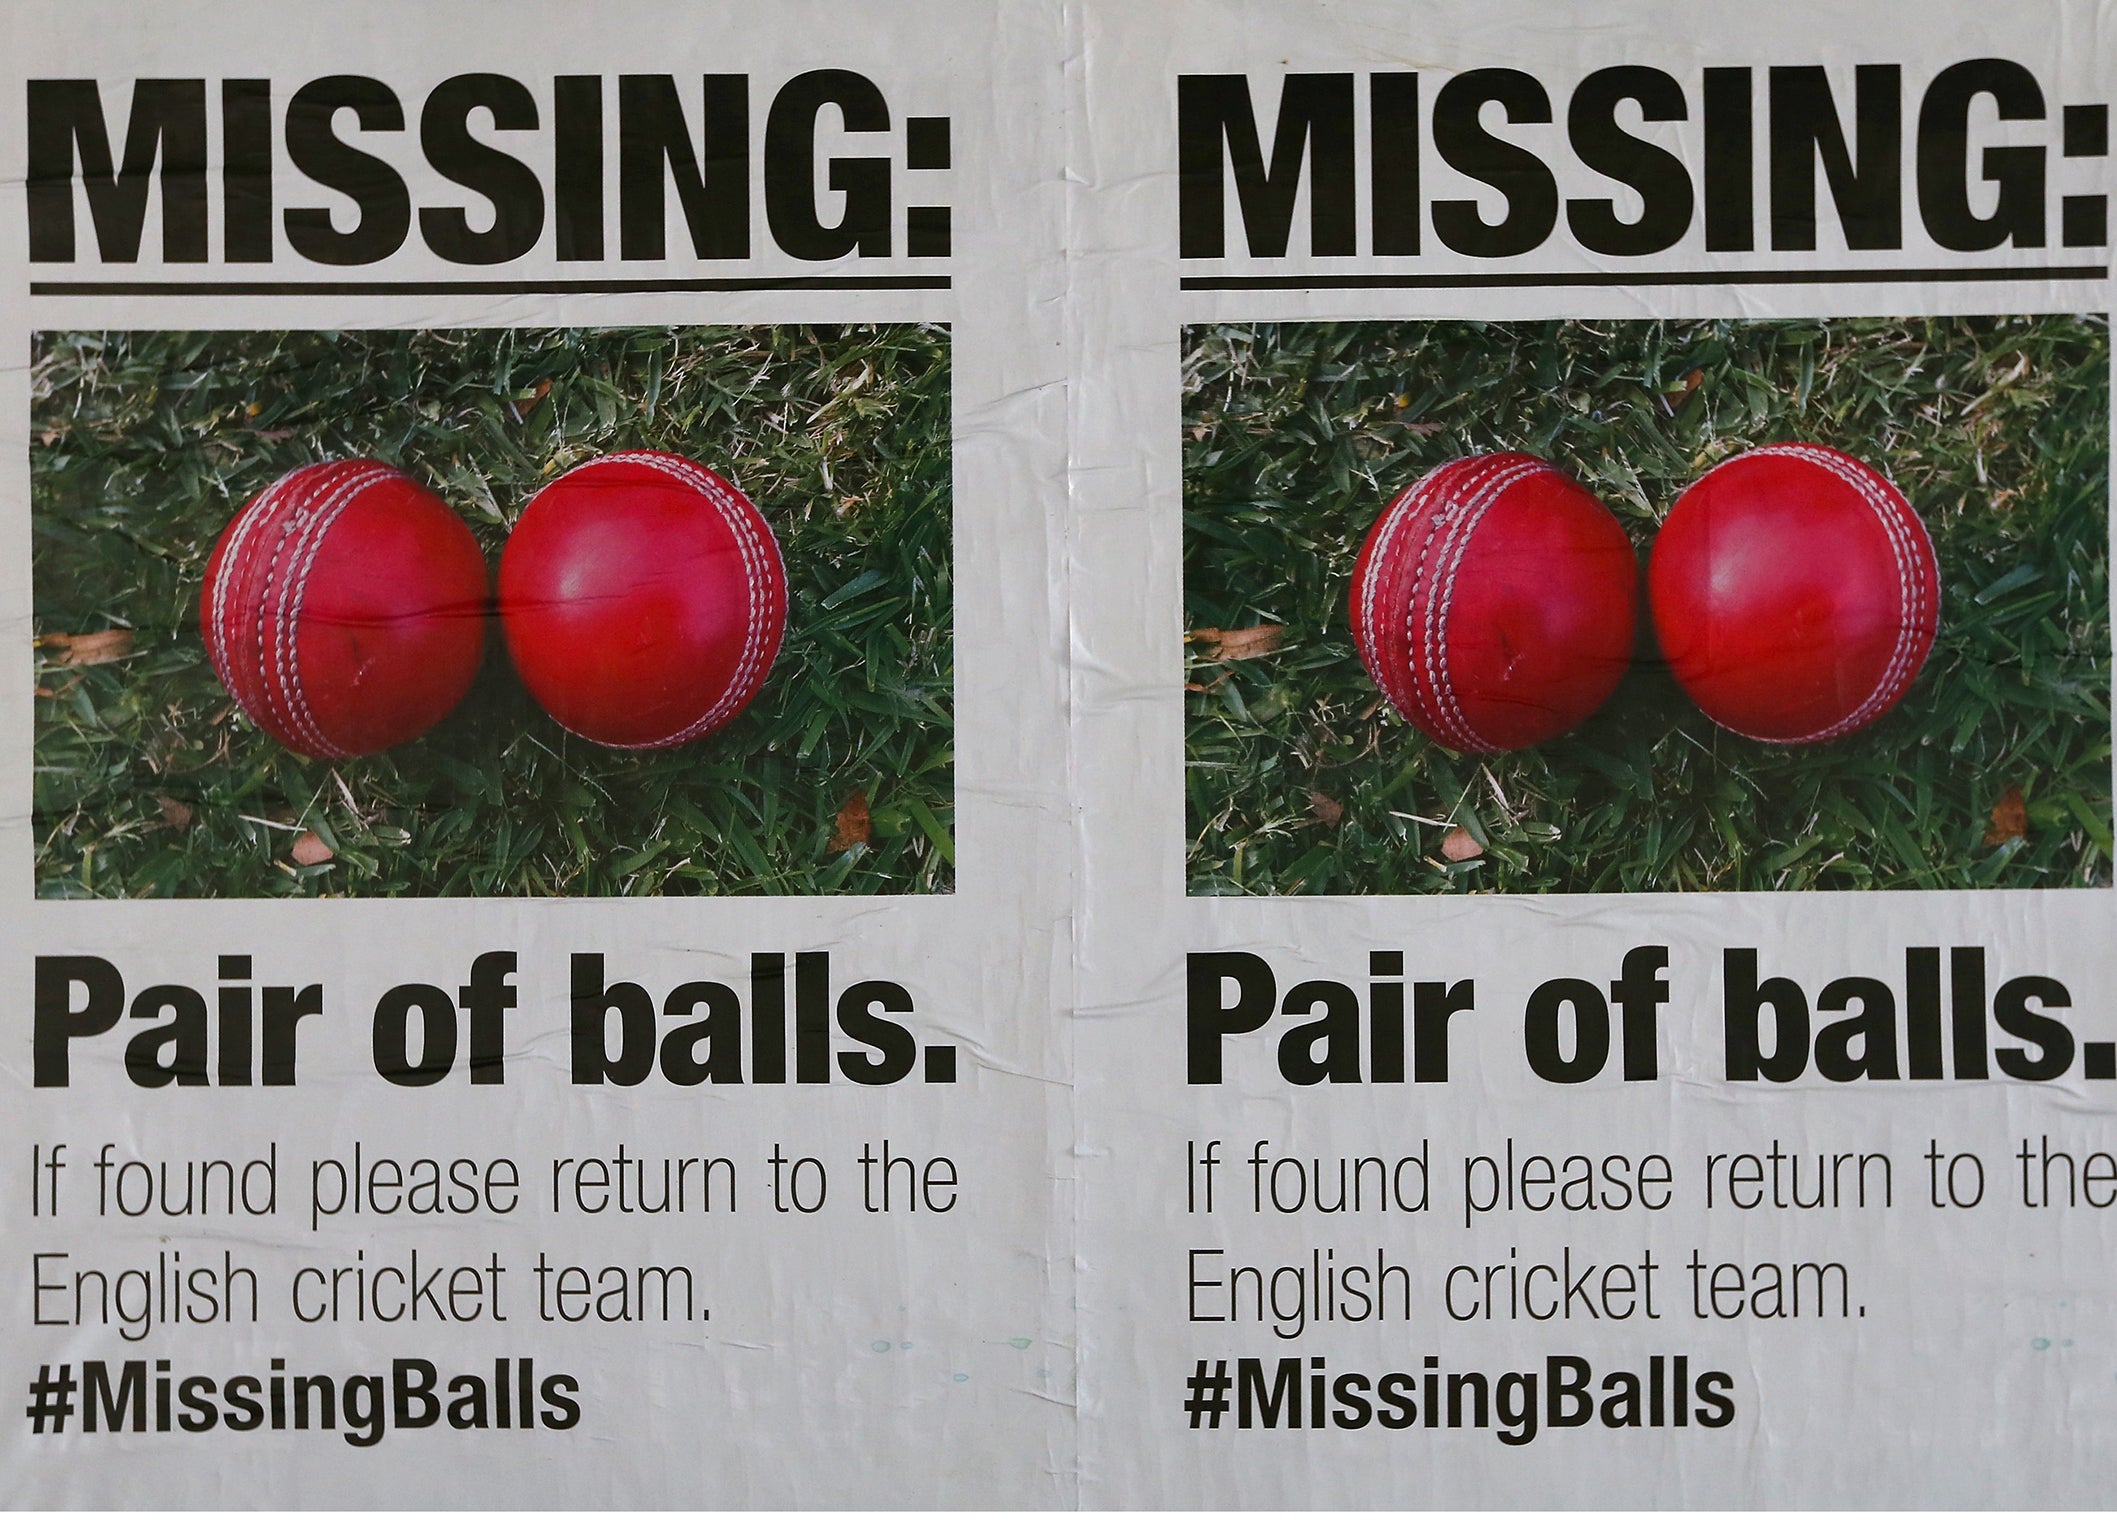 Posters mocking the English cricket team are seen around Melbourne in the lead up to the 2015 ICC Cricket World Cup